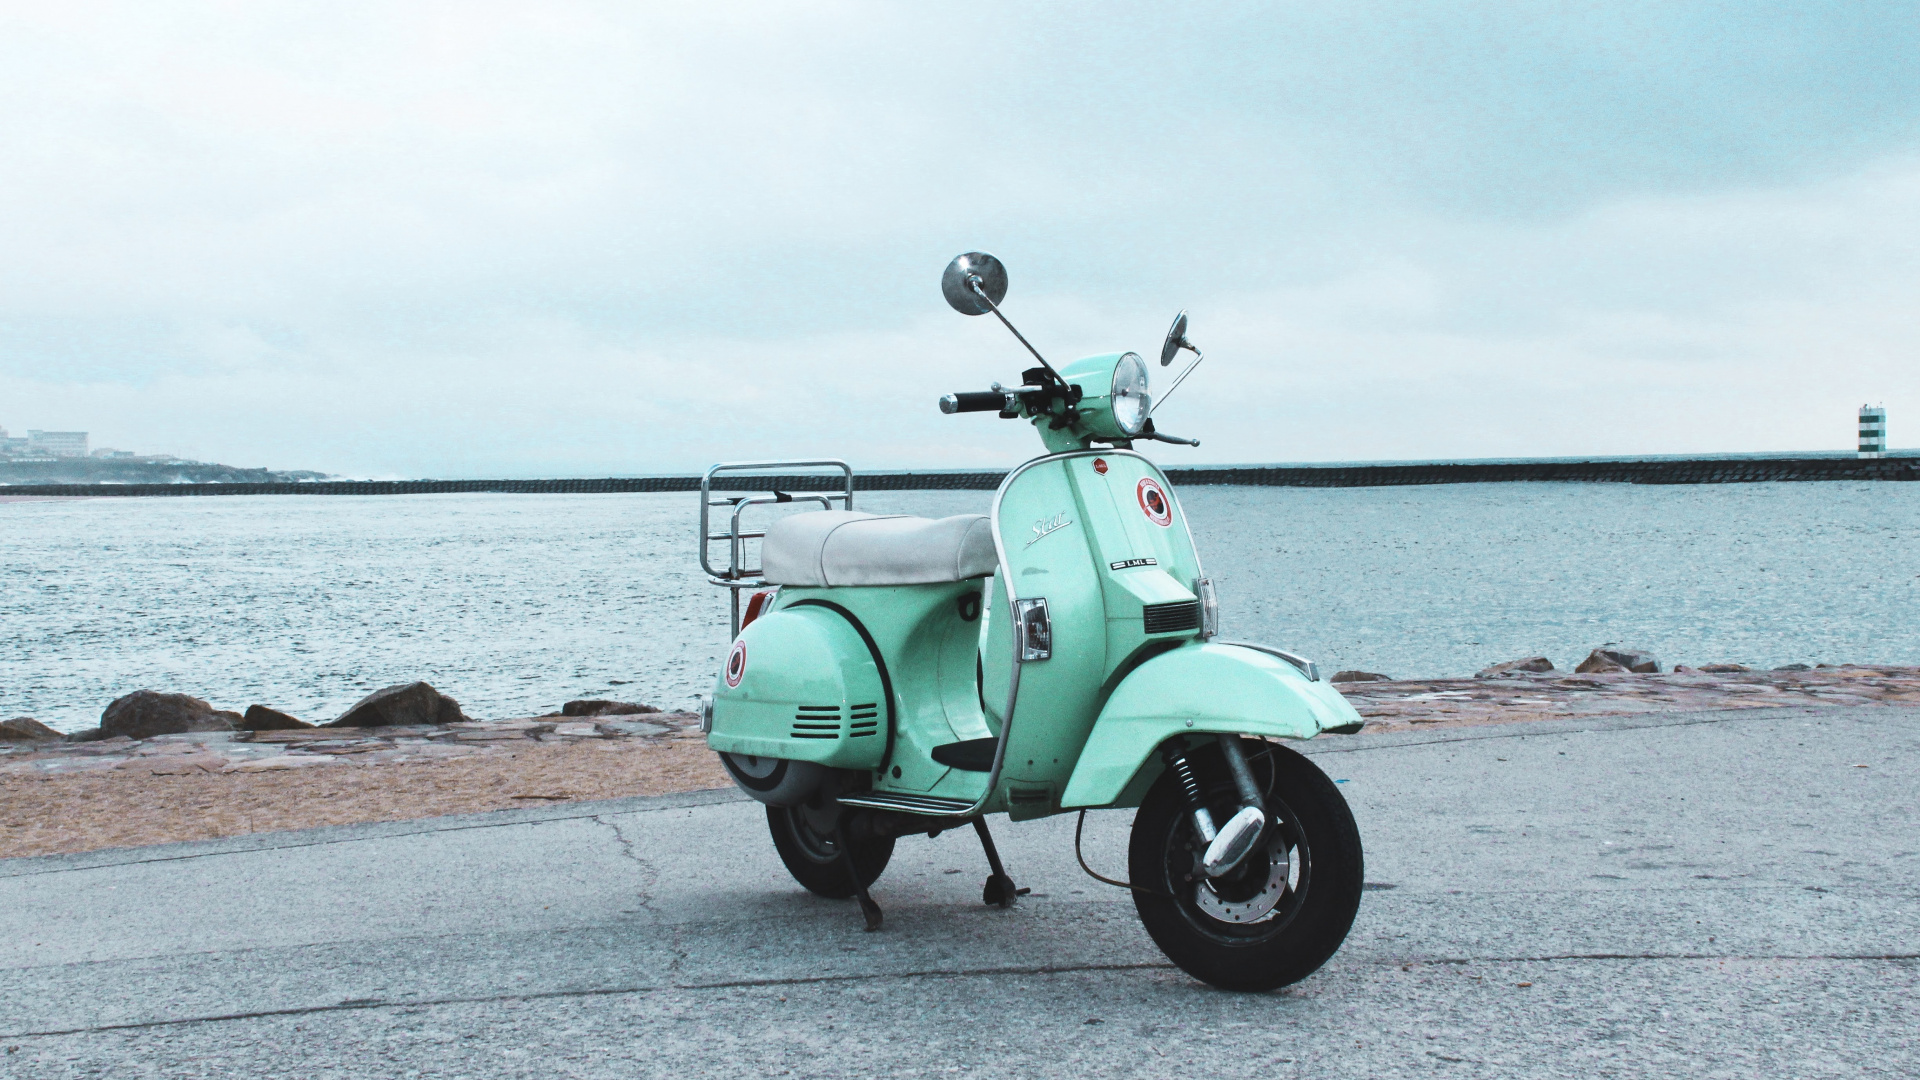 Green Motor Scooter Parked on Gray Concrete Pavement Near Body of Water During Daytime. Wallpaper in 1920x1080 Resolution